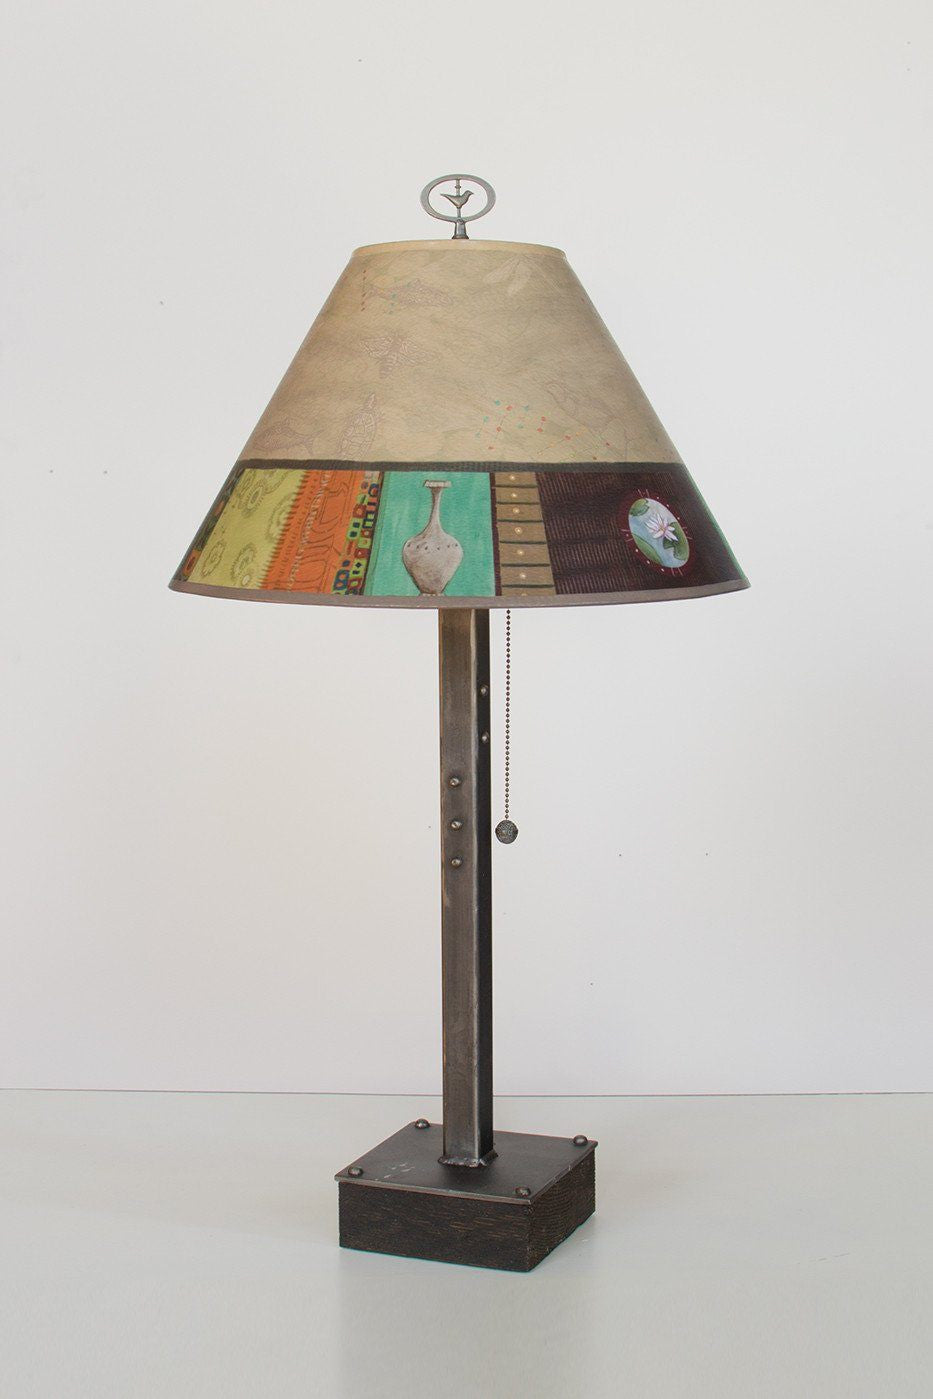 Steel Table Lamp on Wood with Medium Conical Shade in Linen Match - Lit